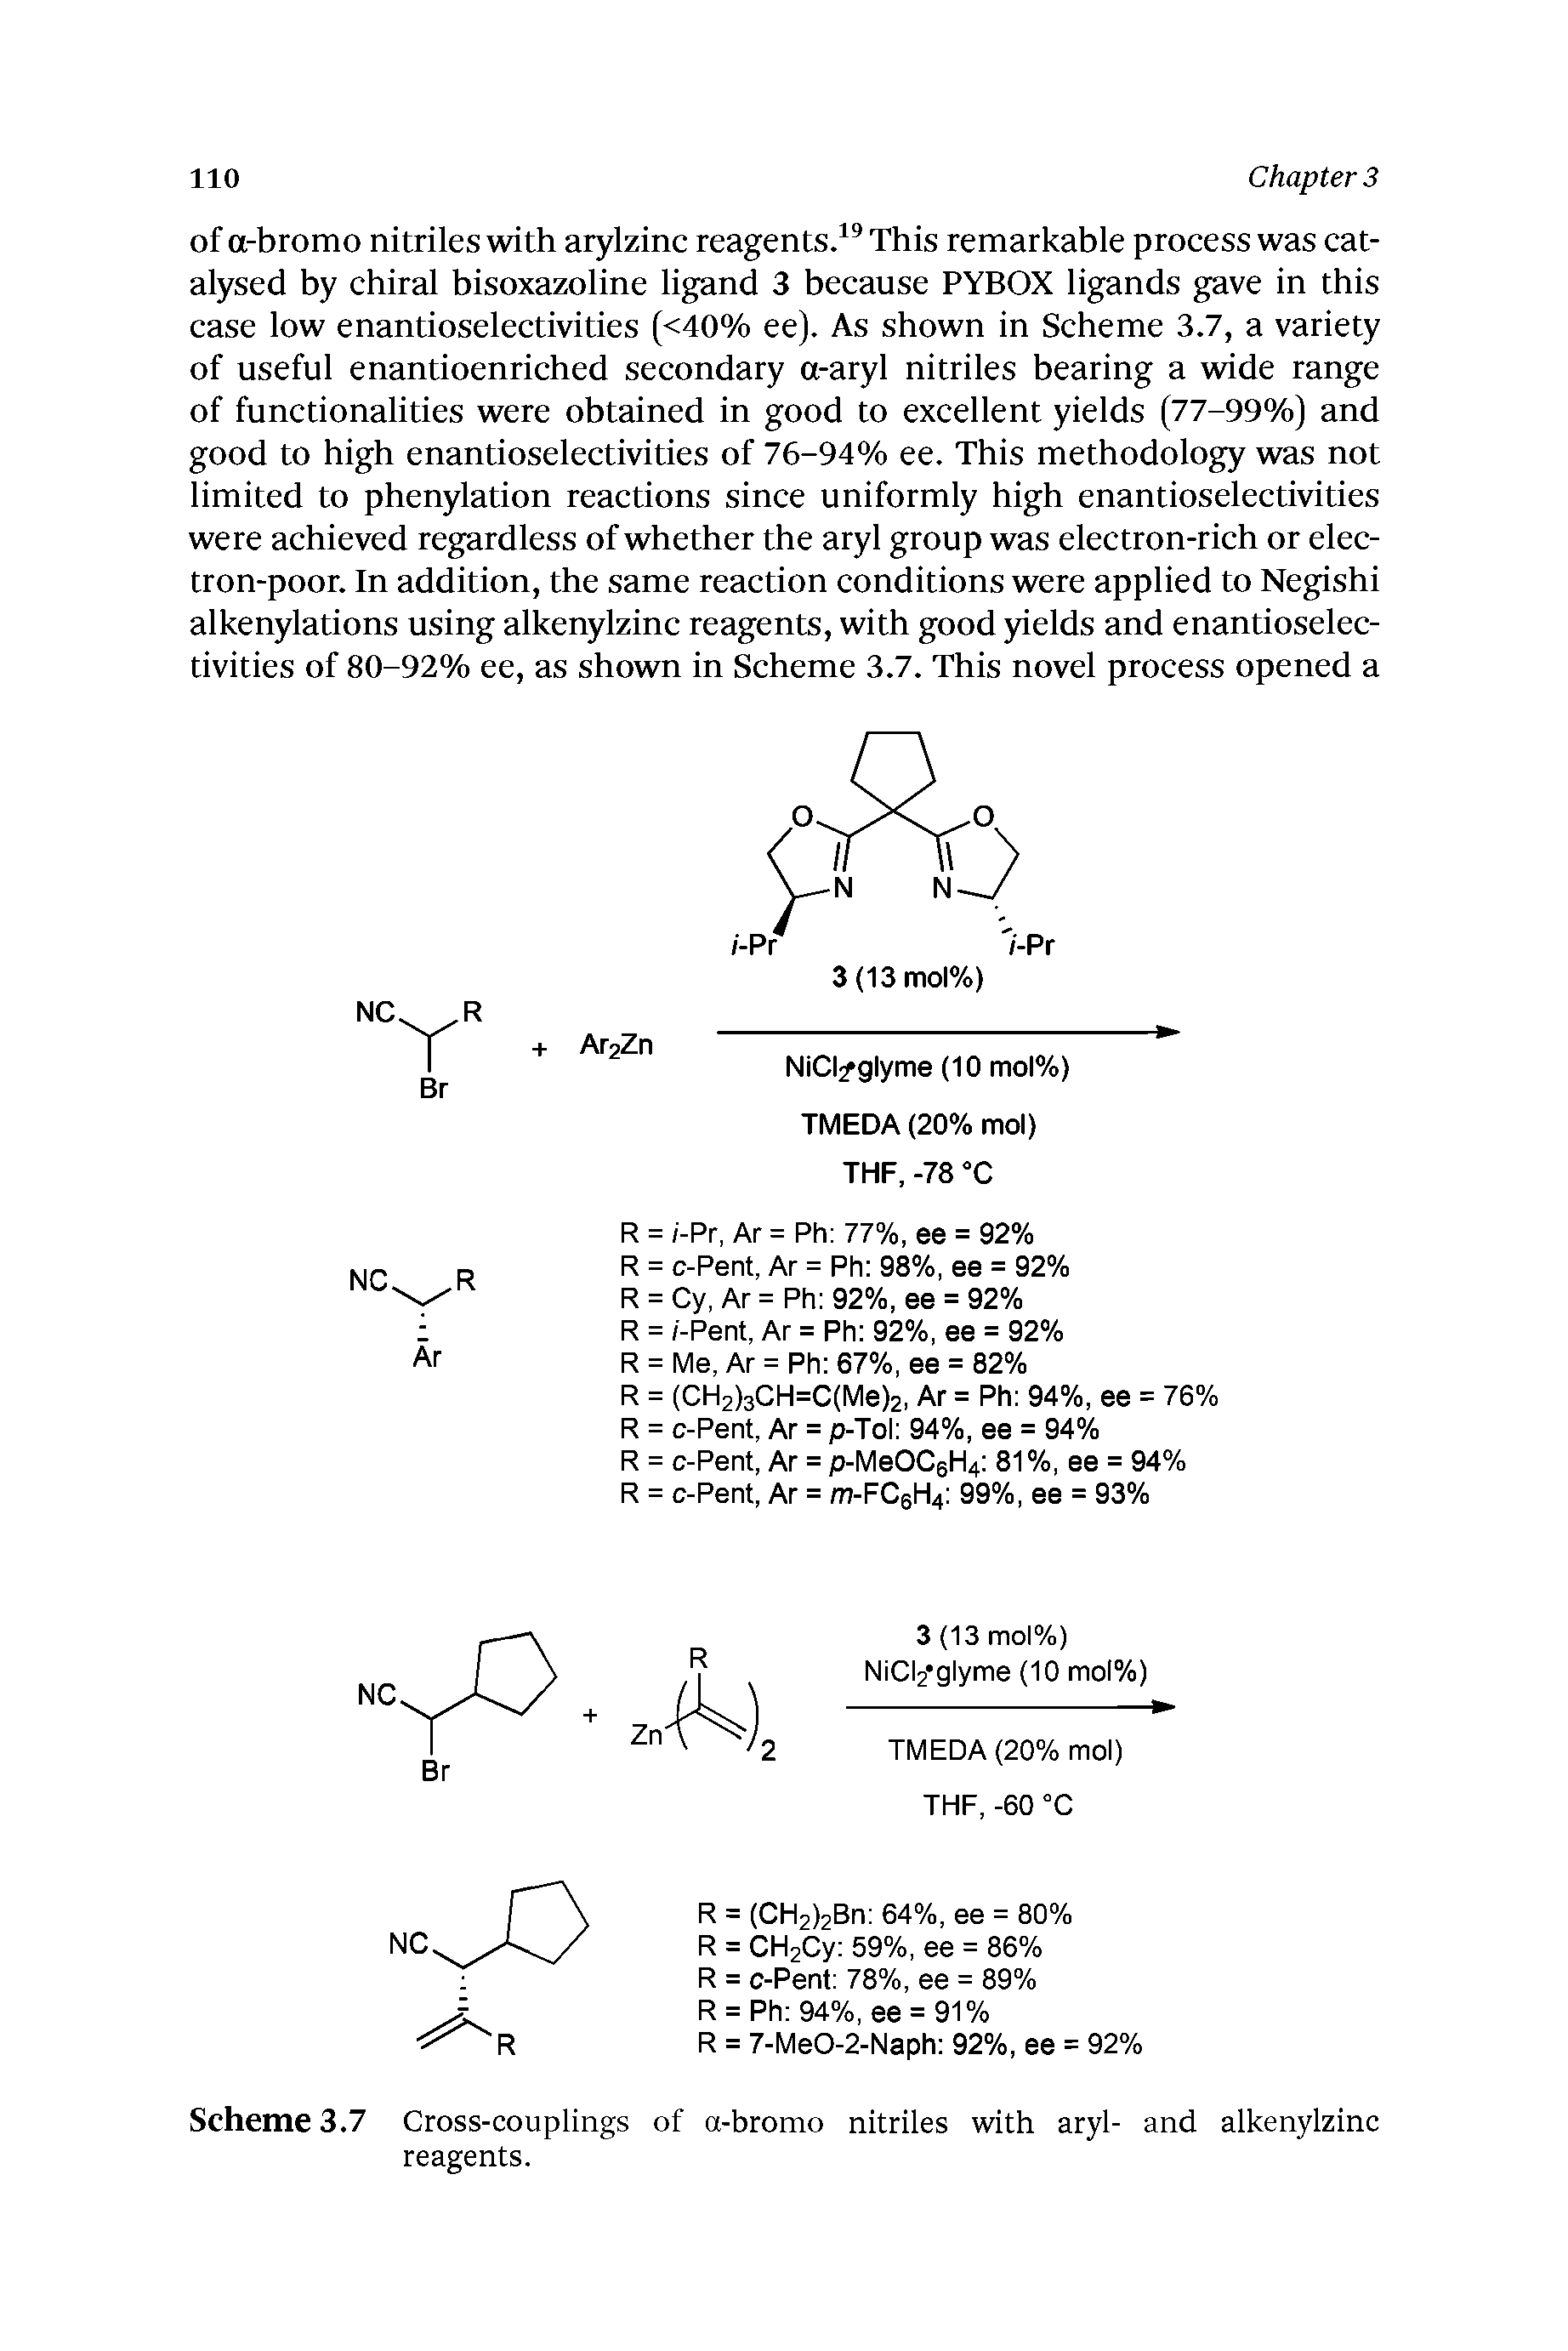 Scheme 3.7 Cross-couplings of a-bromo nitriles with aryl- and alkenylzinc reagents.